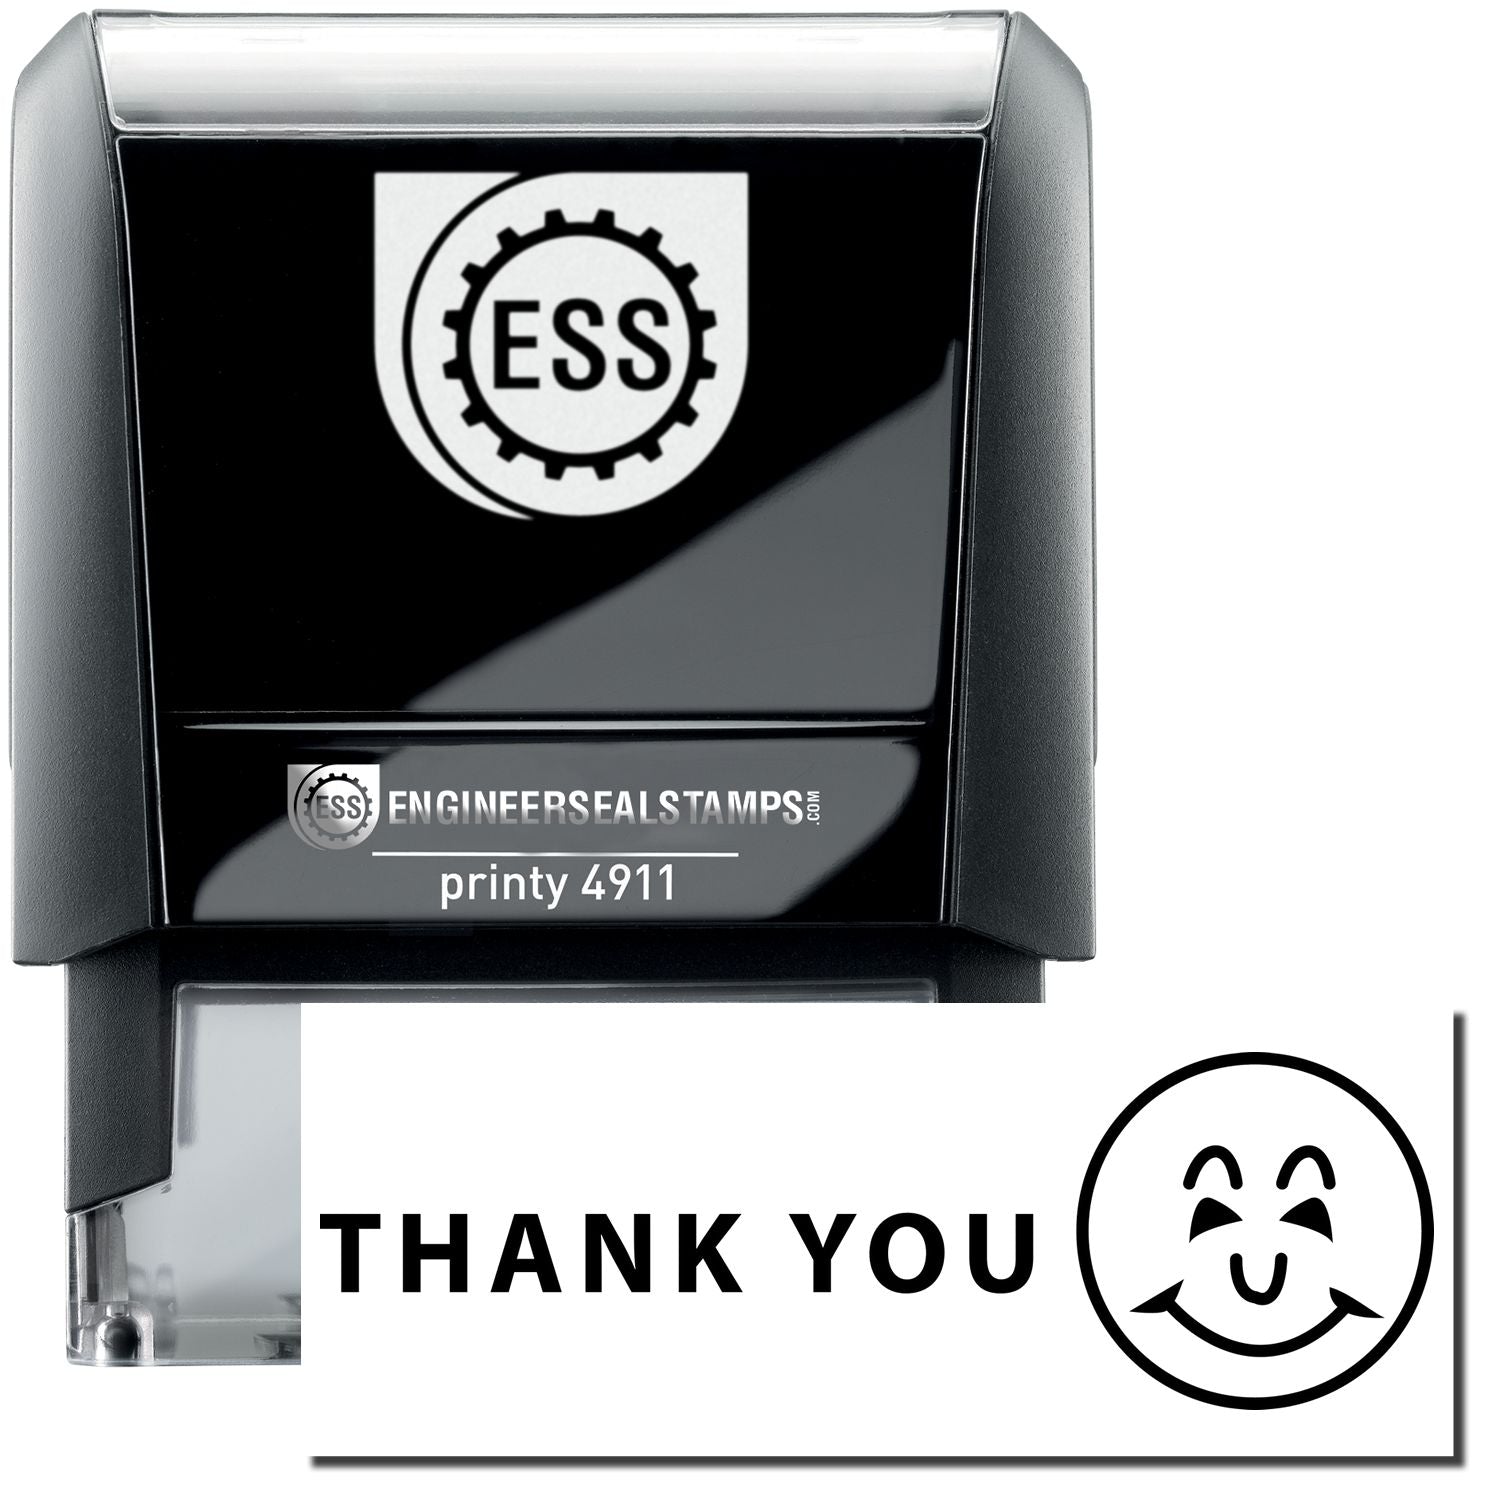 A self-inking stamp with a stamped image showing how the text "THANK YOU" with an image of a smiley on the right is displayed after stamping.